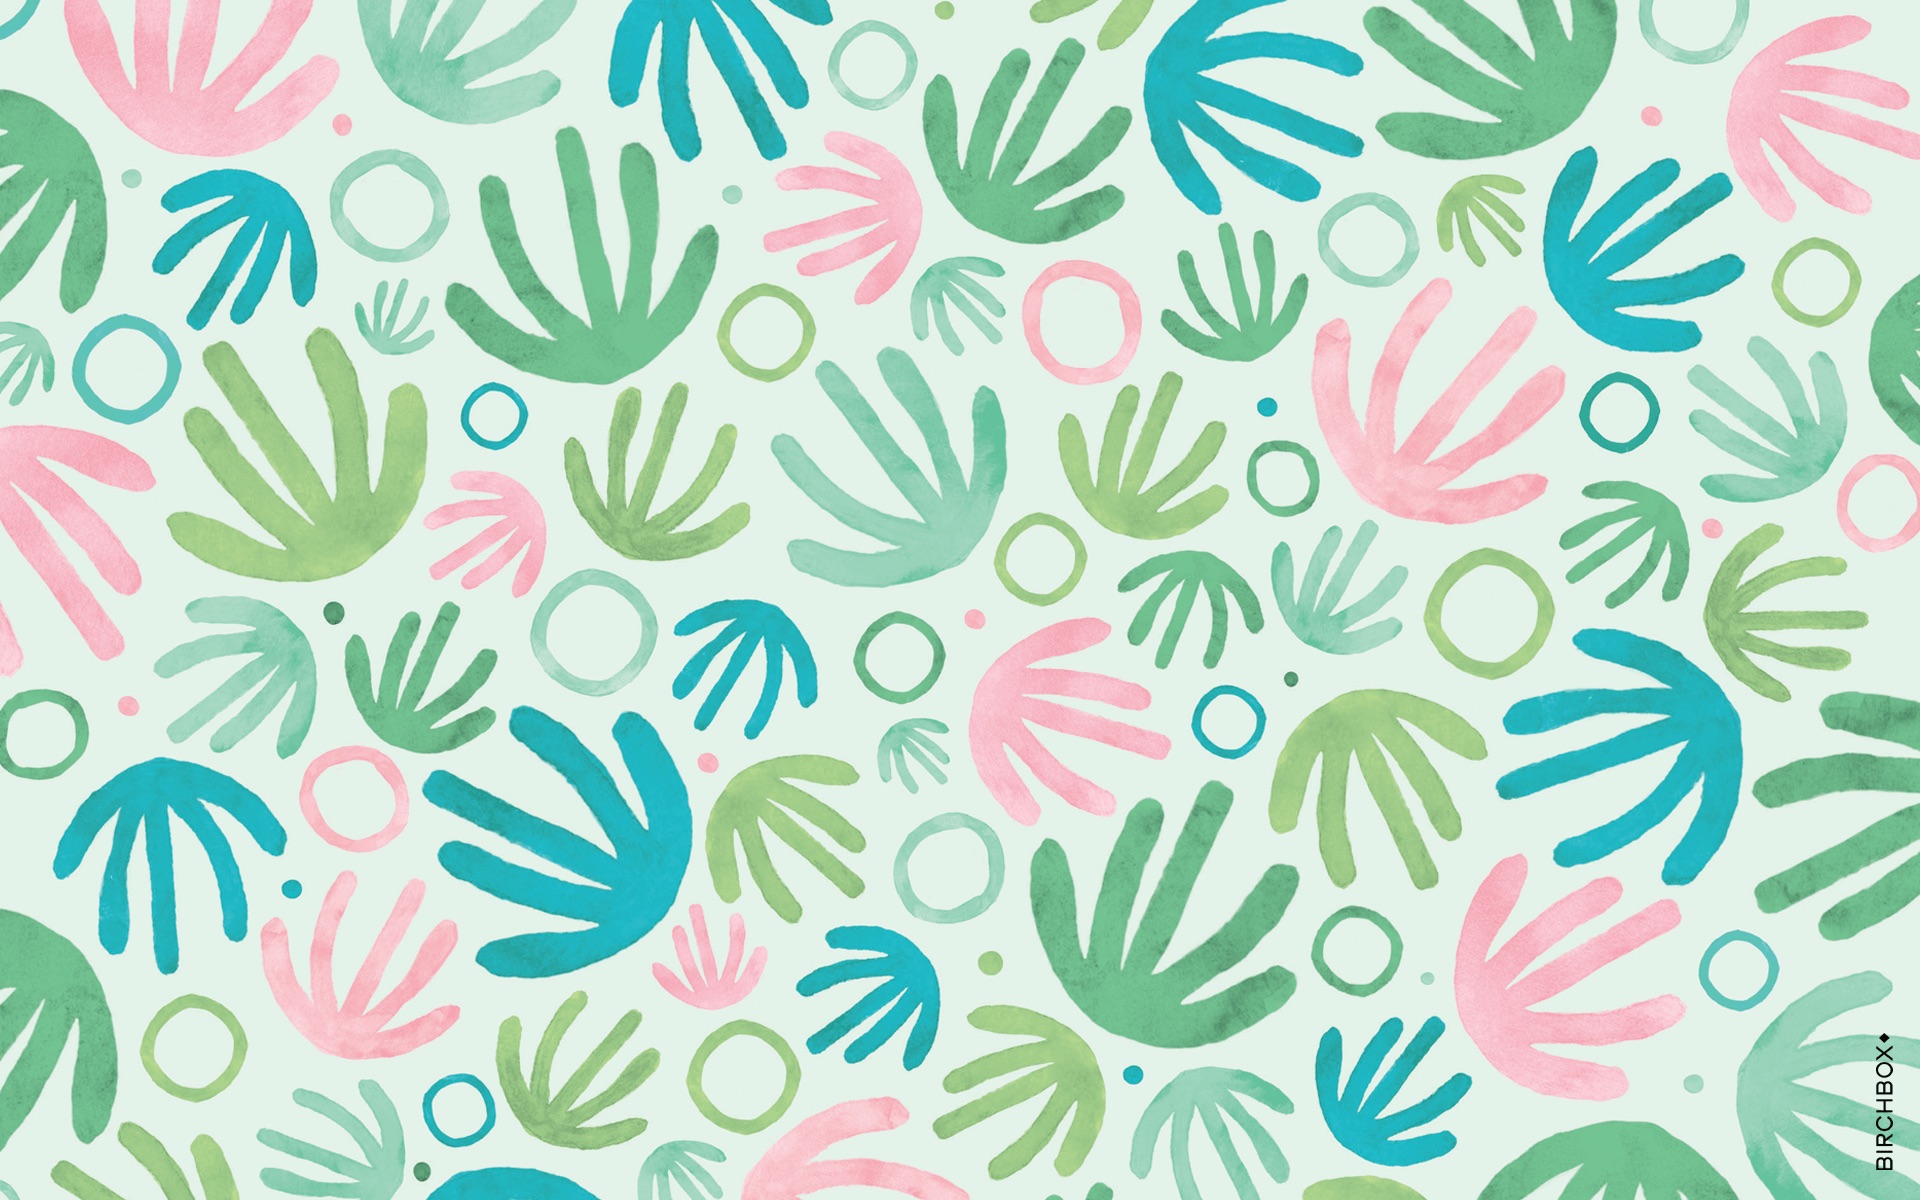 wallpaper design,aqua,green,pattern,turquoise,wrapping paper